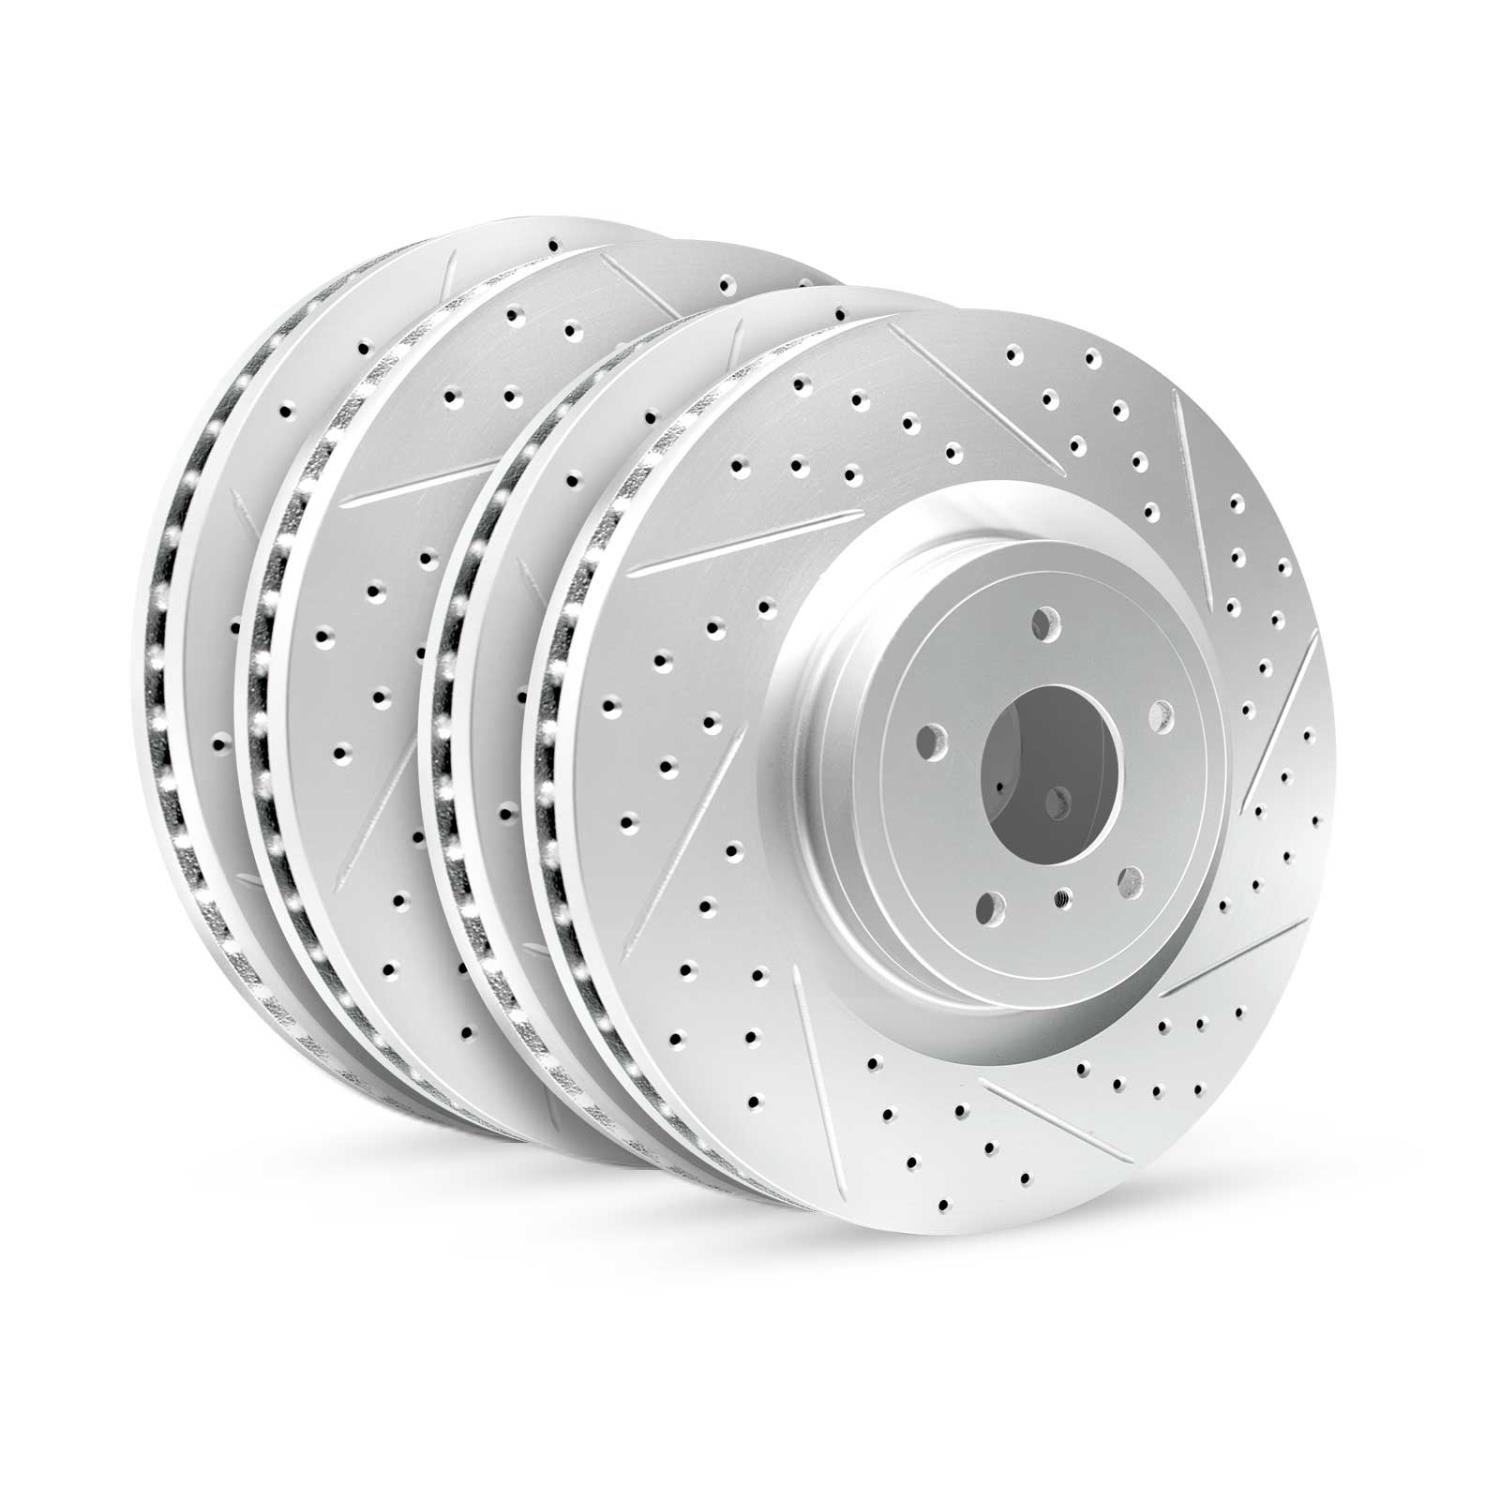 GEO-Carbon Drilled/Slotted Rotors, 2010-2011 BMW, Position: Front/Rear